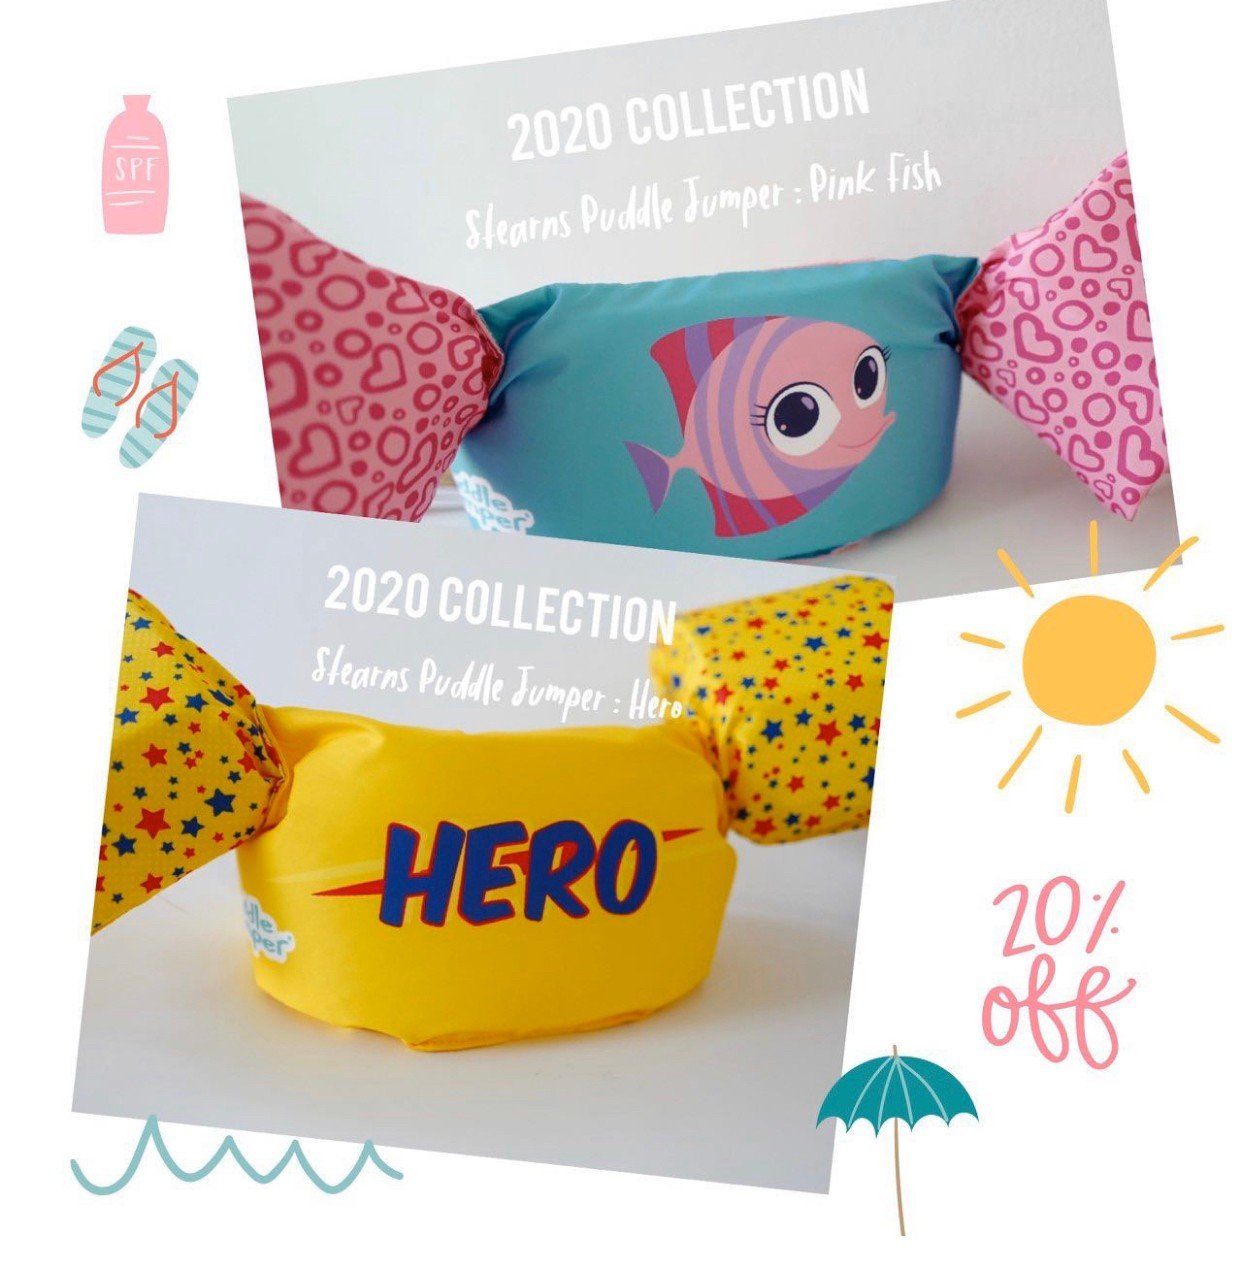 Puddle Jumper : 2020 Collection ( Pink Fish / Hero )